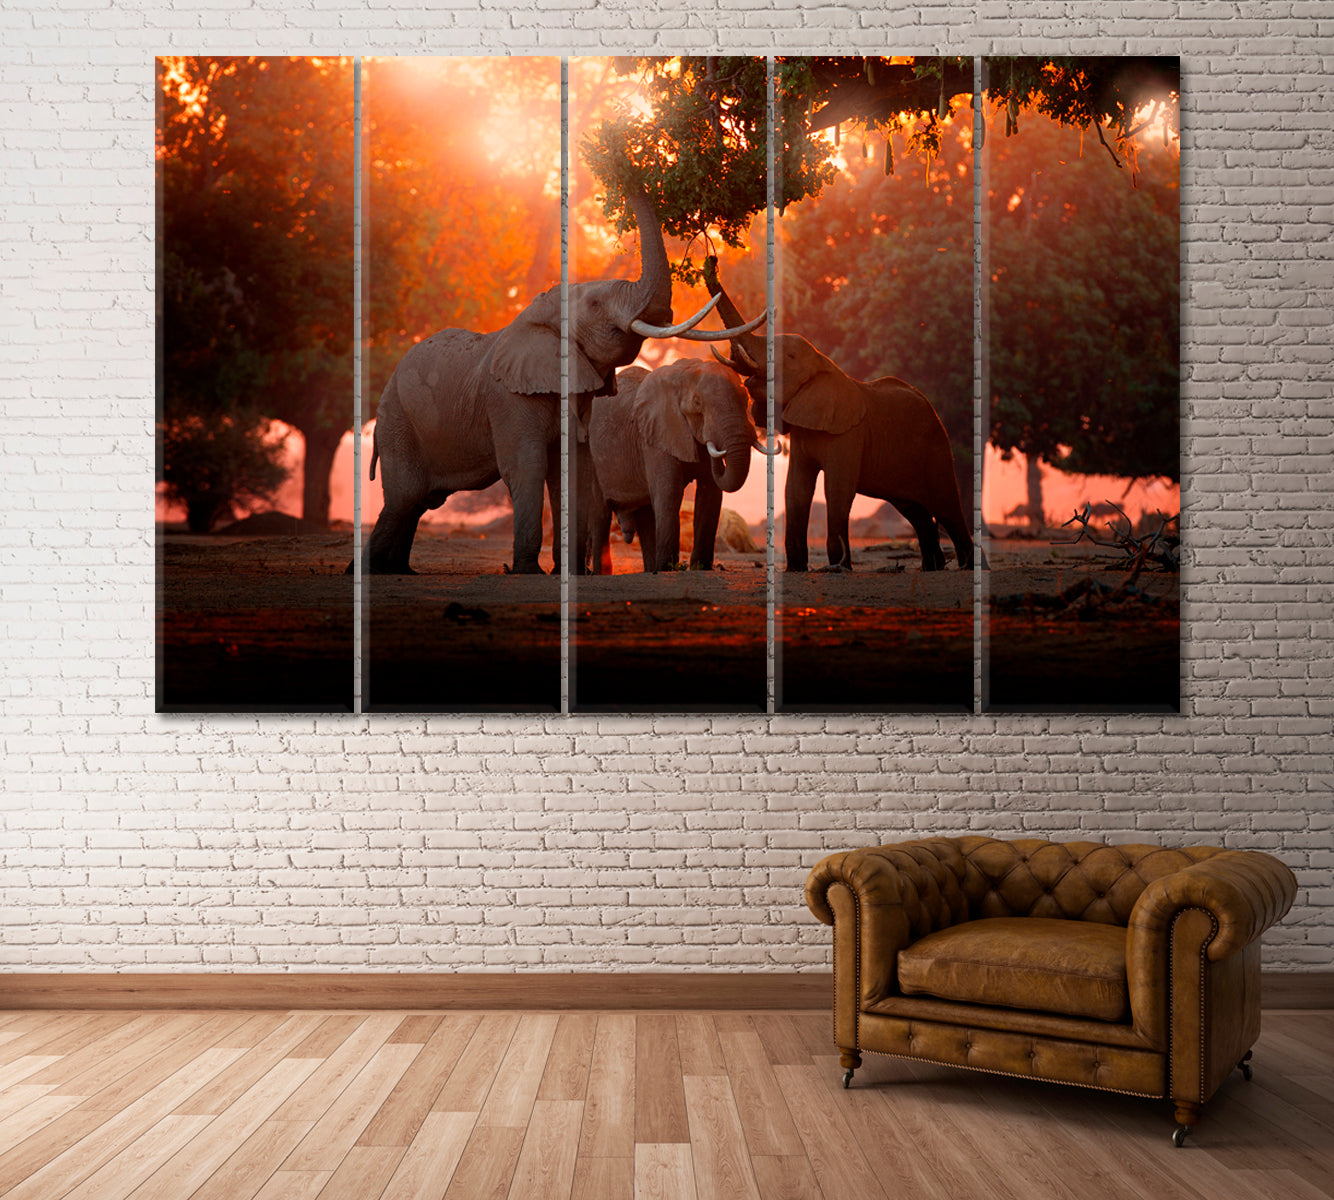 Elephants in Zimbabwe Africa Canvas Print ArtLexy 5 Panels 36"x24" inches 